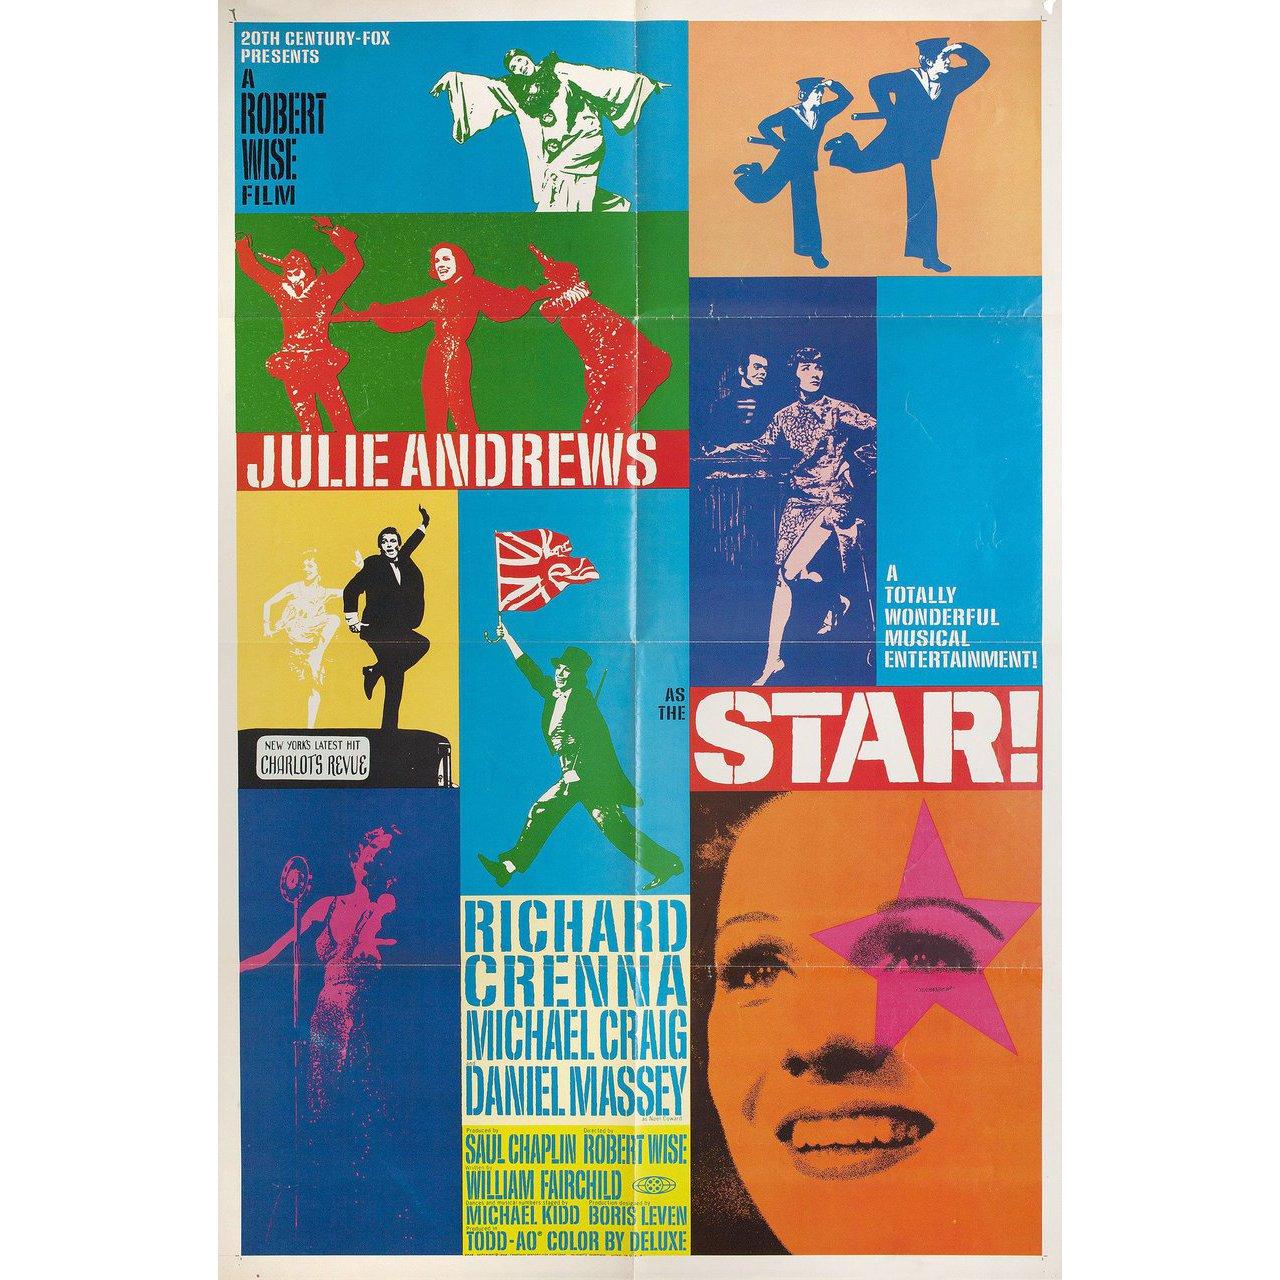 Original 1968 U.S. one sheet poster for the film Star! Directed by Robert Wise with Julie Andrews / Richard Crenna / Michael Craig / Daniel Massey. Very good-fine condition, folded. Many original posters were issued folded or were subsequently